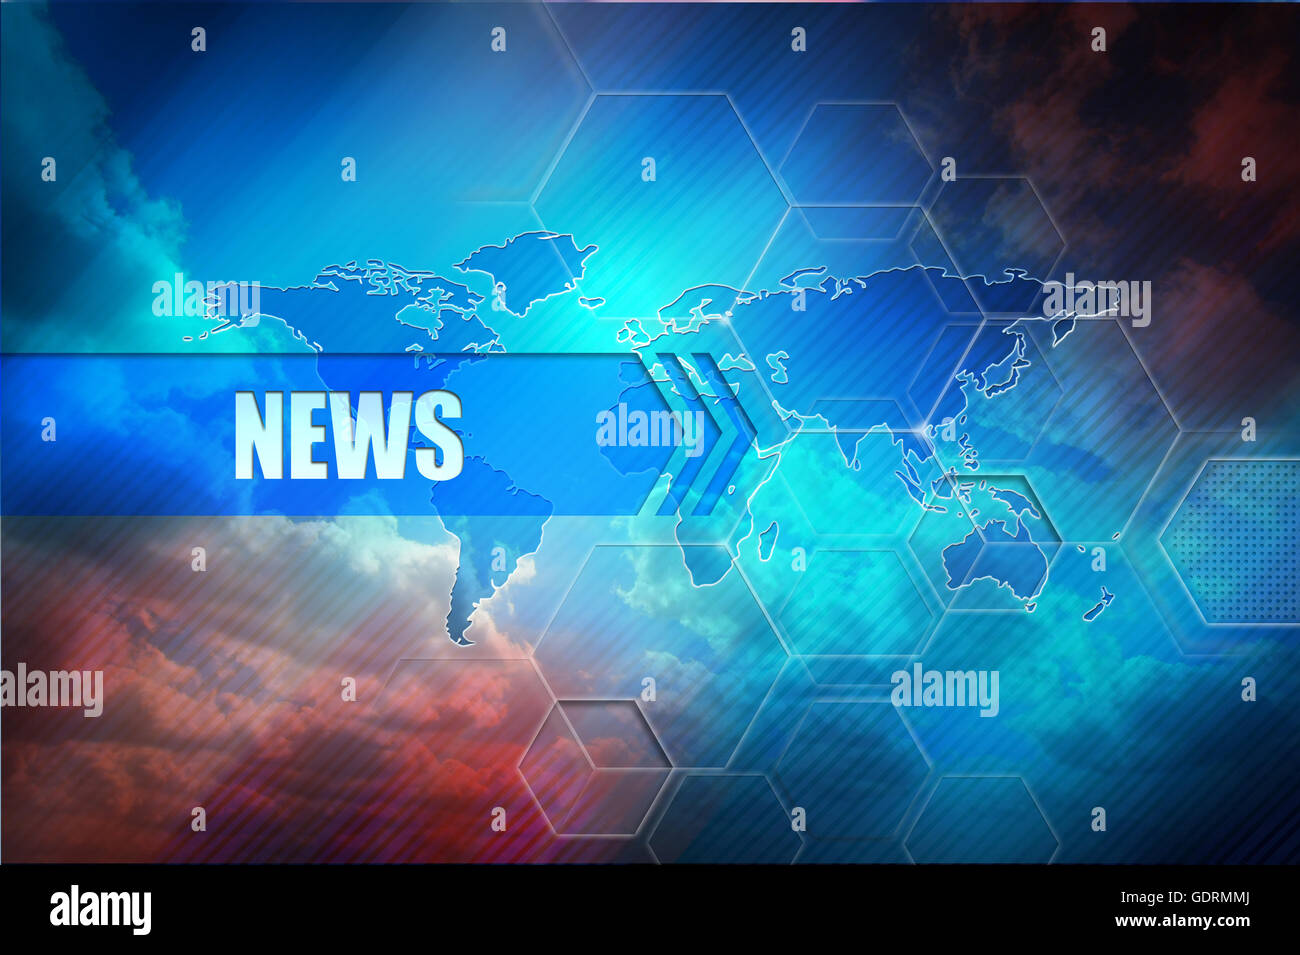 News header banner, abstract colorful background, global map and text  header 